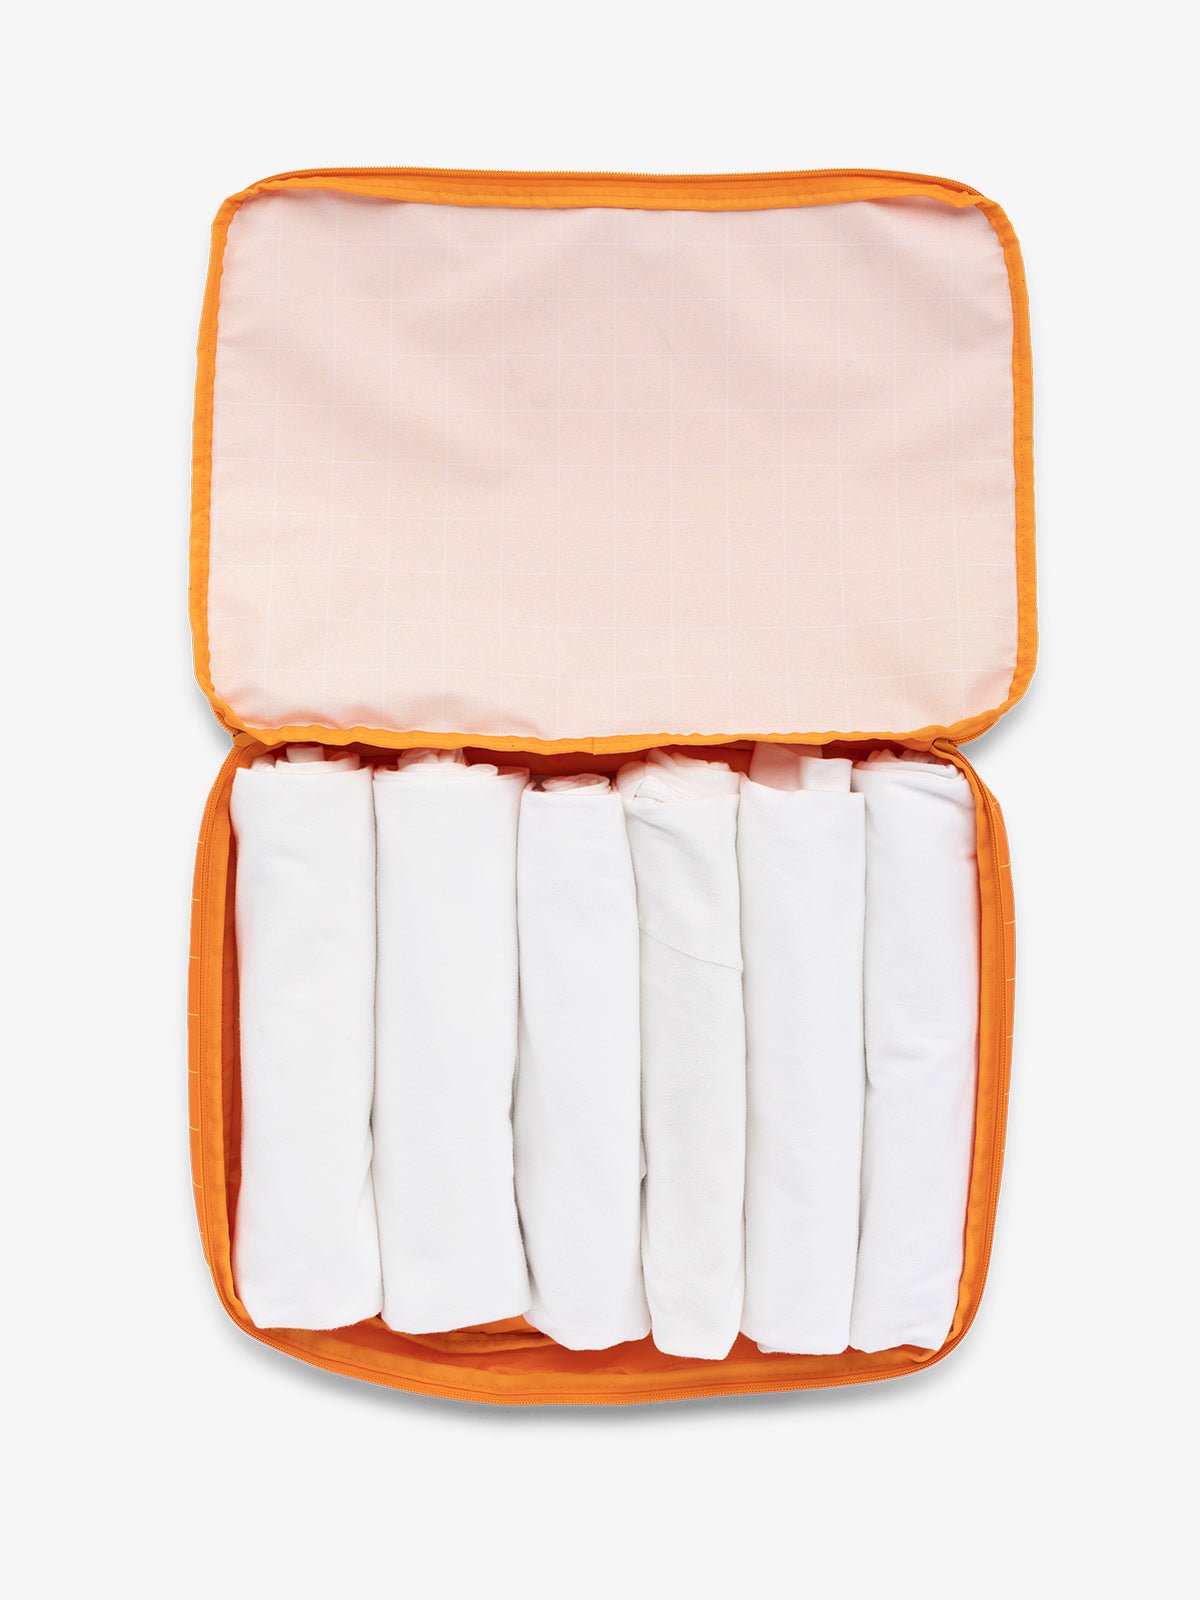 CALPAK Large Compression Packing cubes for travel made with durable materials in orange grid